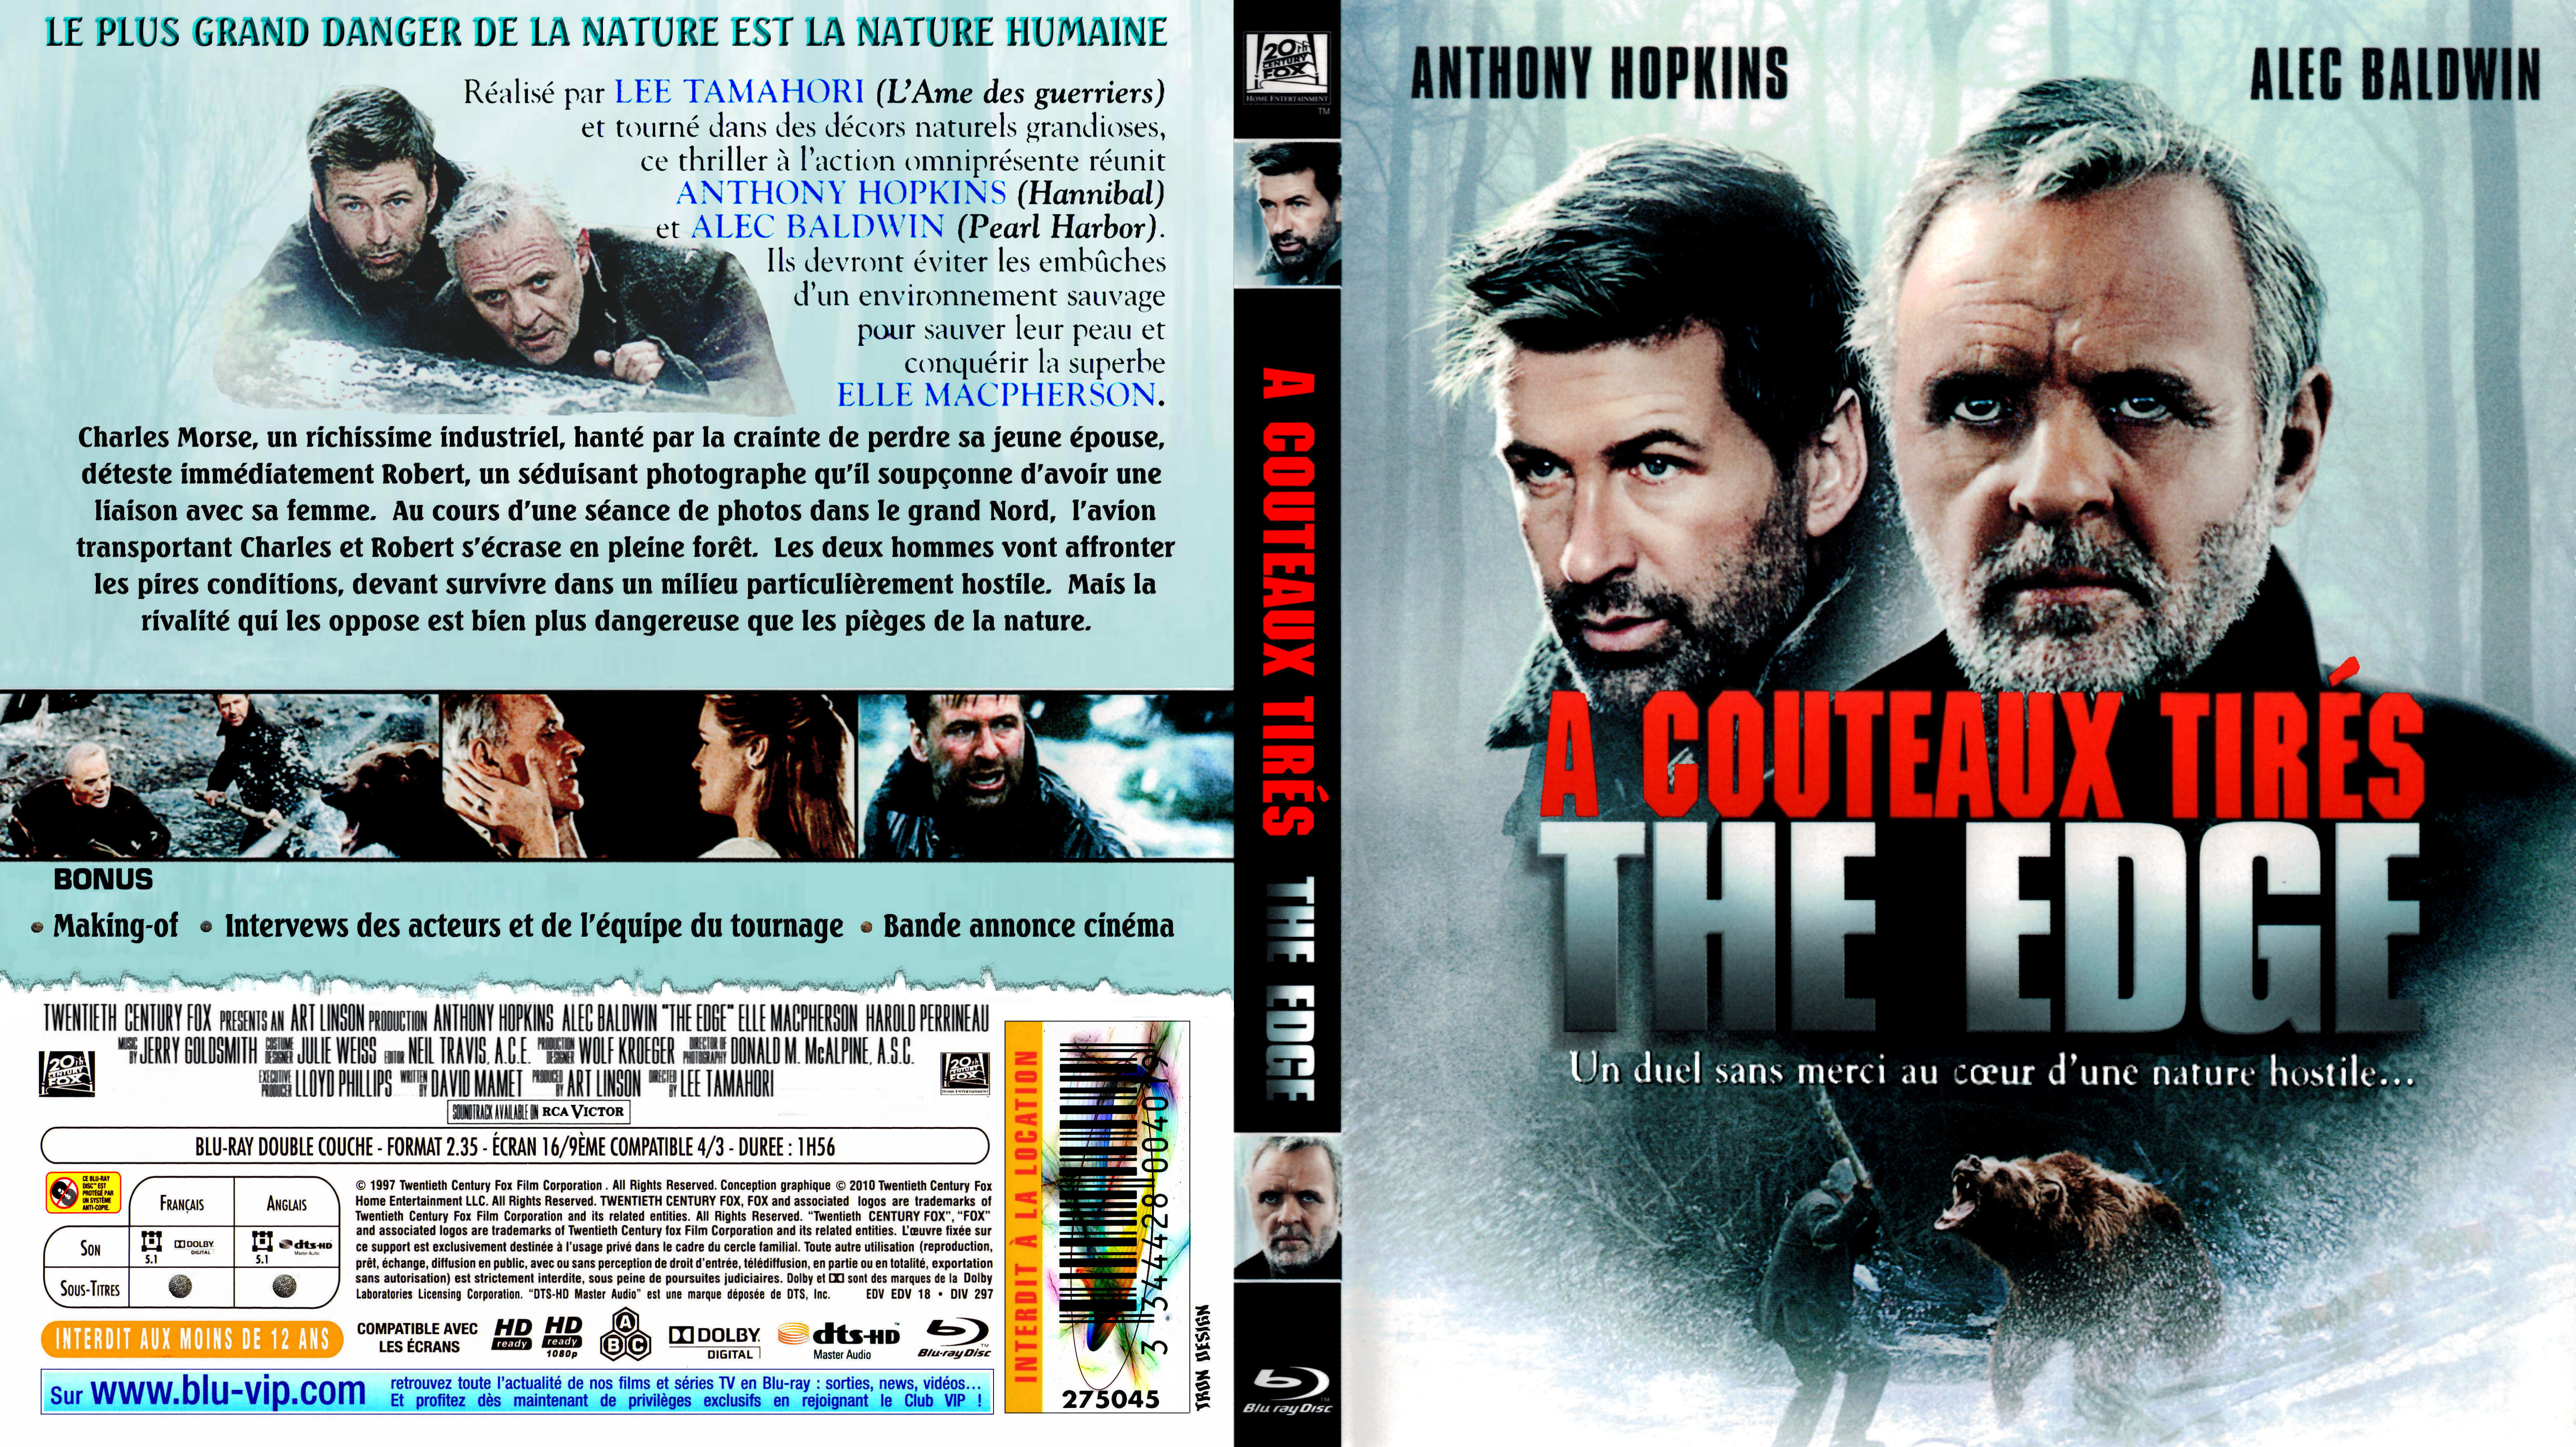 Jaquette DVD A couteaux tirs custom (BLU-RAY)